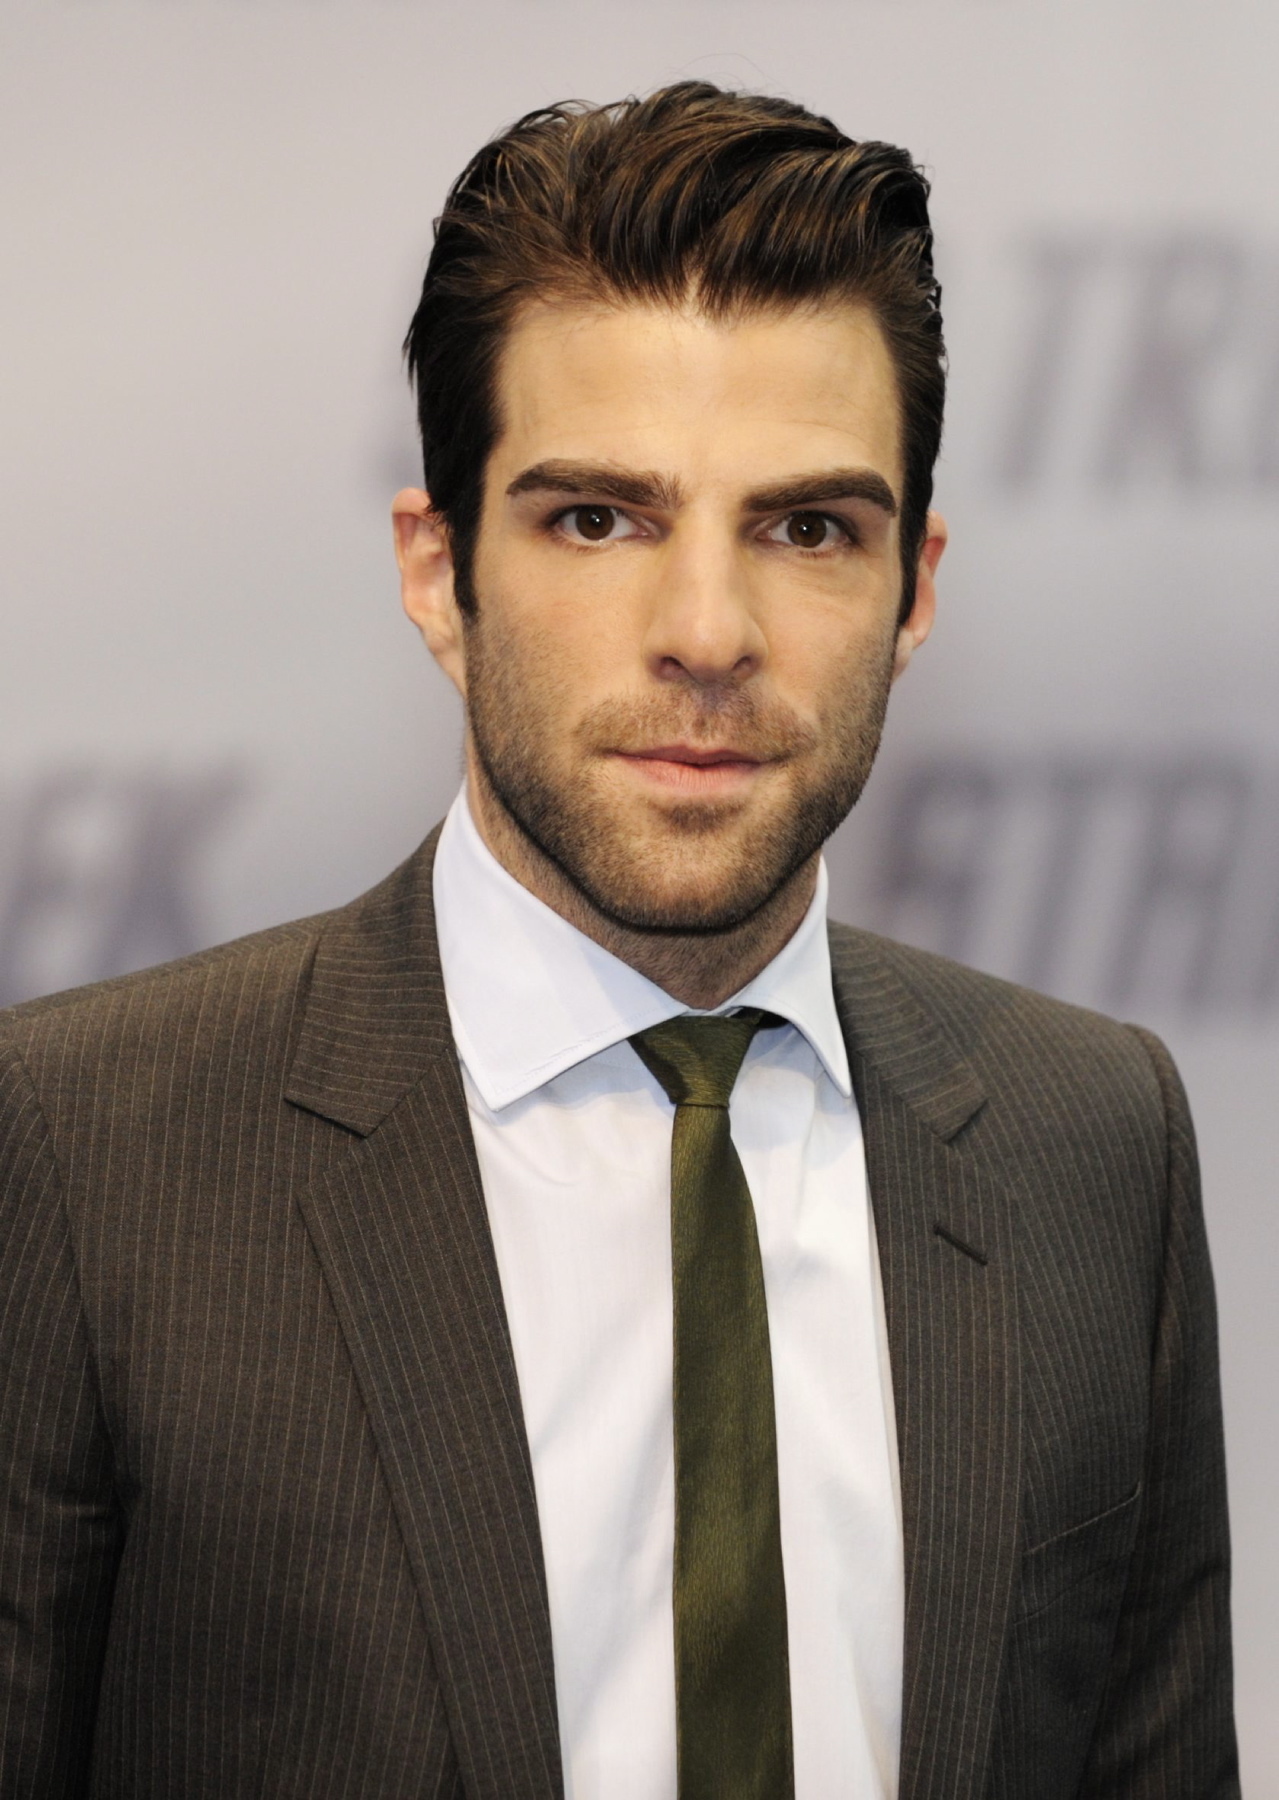 High Resolution Wallpaper | Zachary Quinto 1279x1800 px